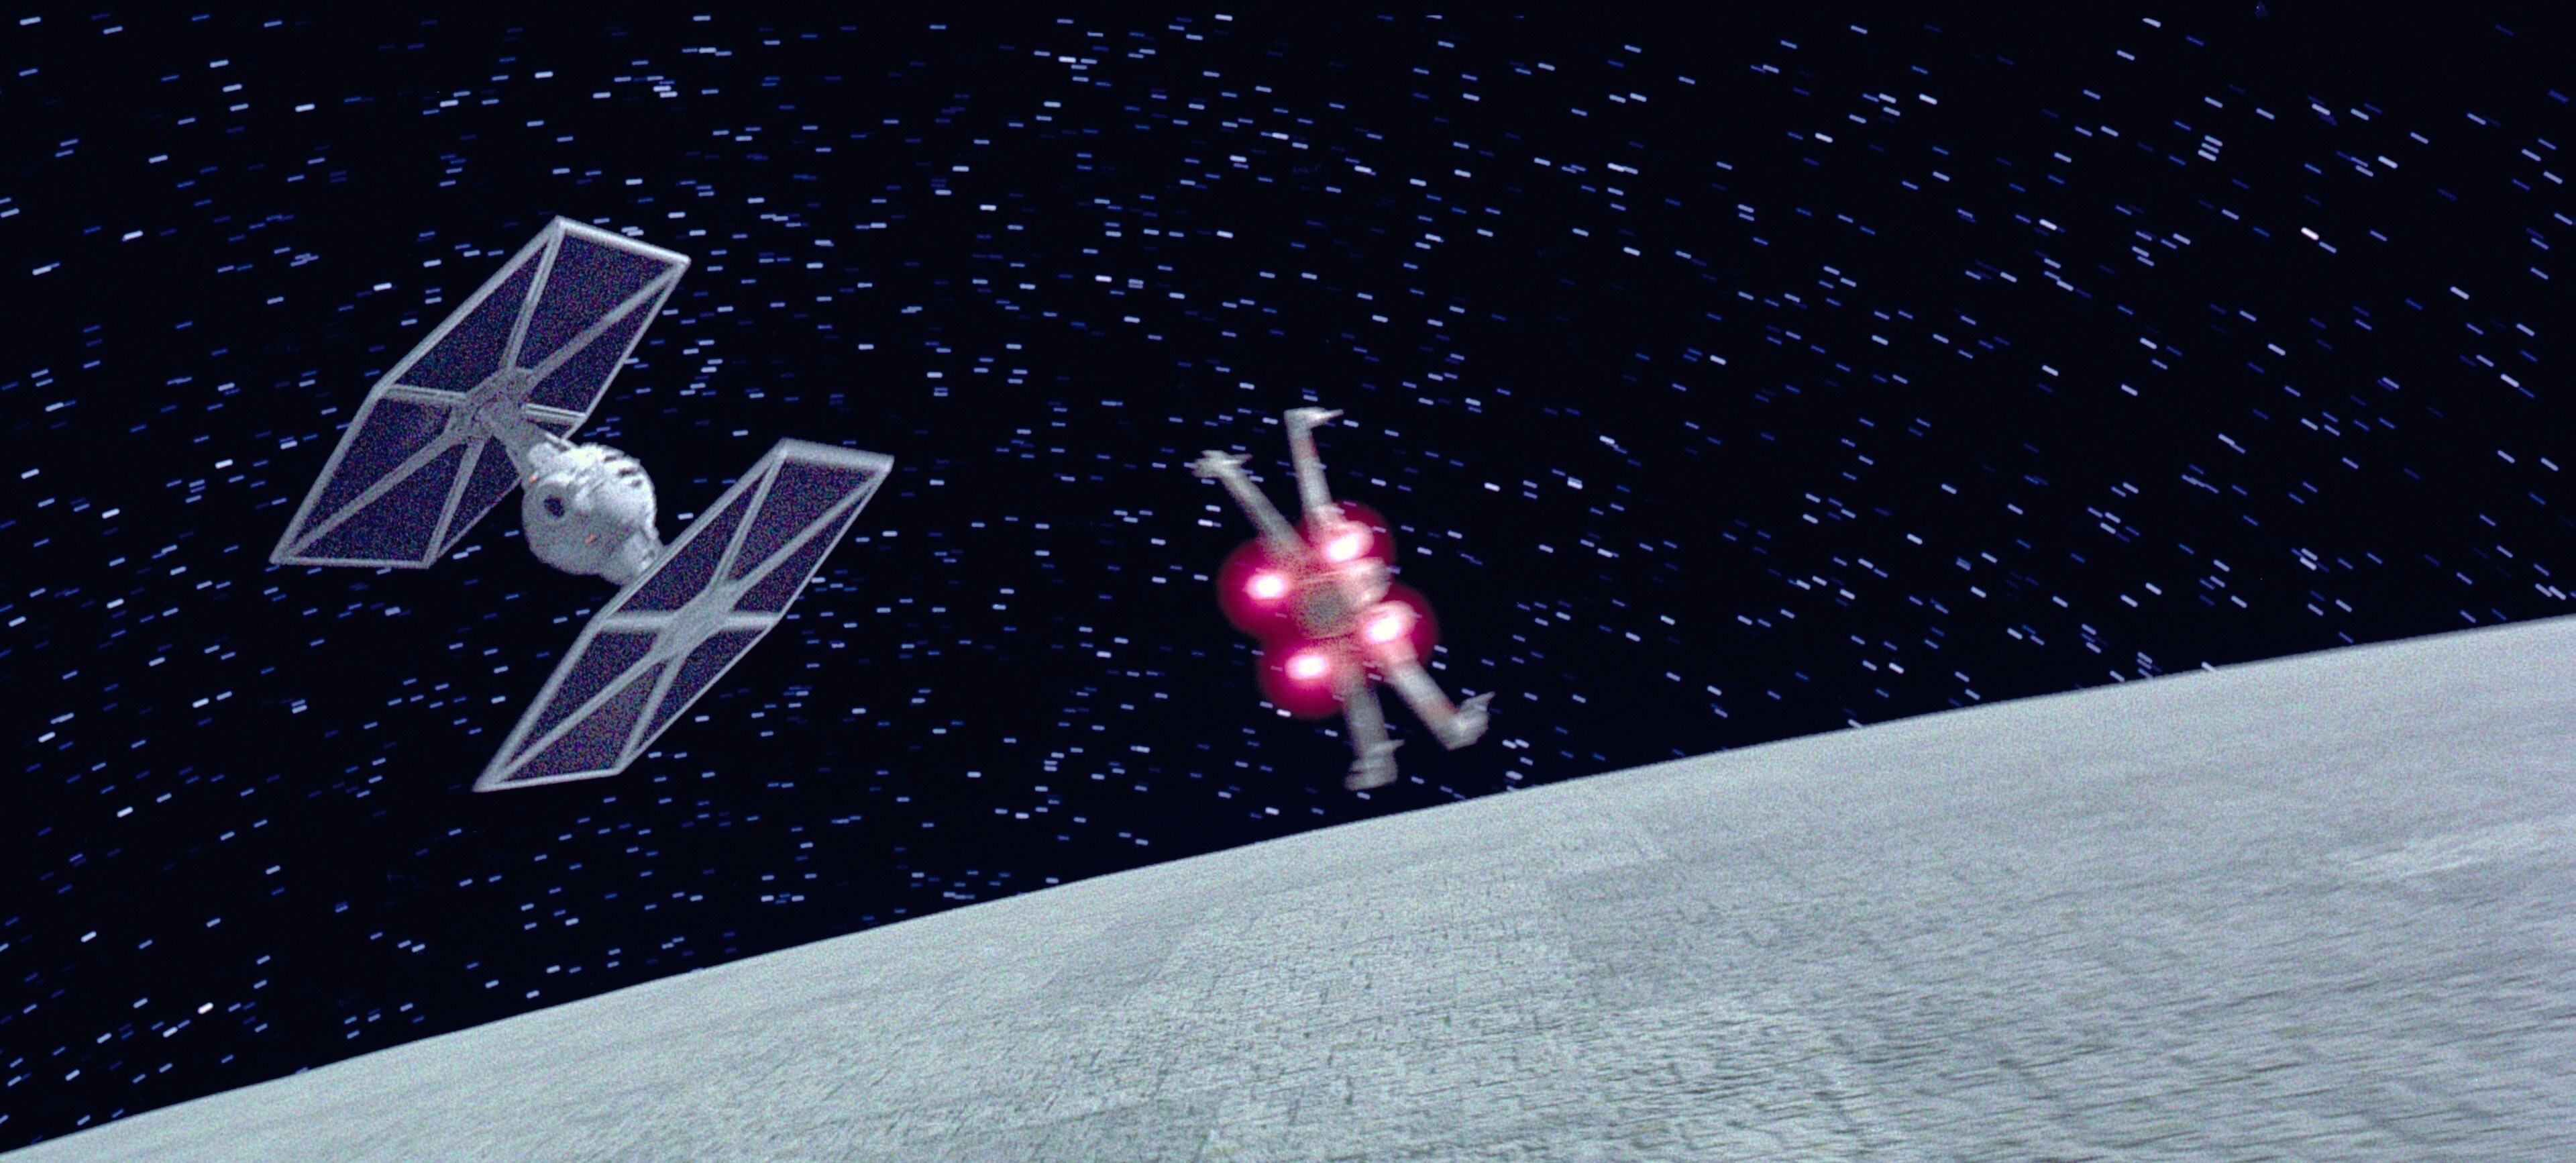 TIE fighters dueled the rebel X-wings and Y-wings above the Death Star’s surface, with Darth Vade...